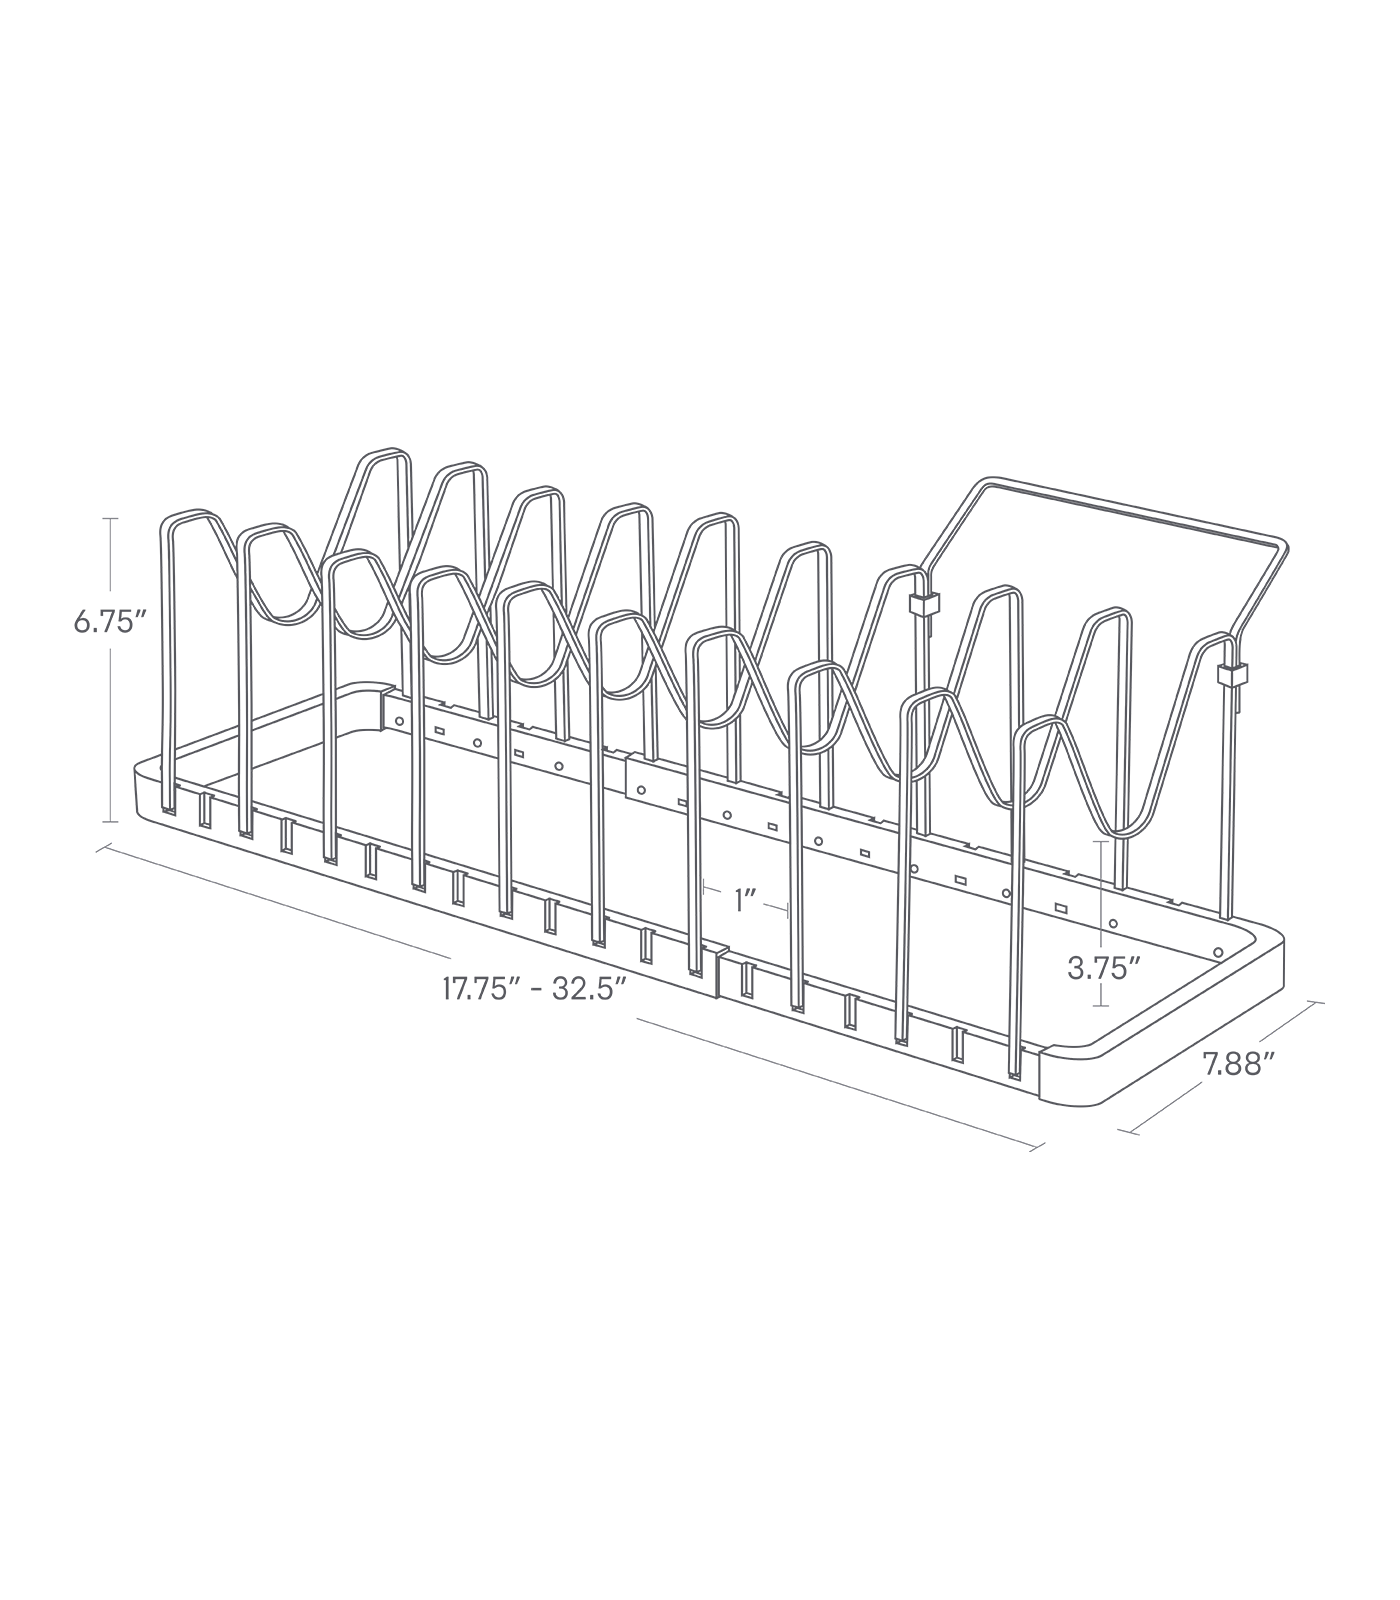 Dimension image for Adjustable Pot Lid Organizer on a white backrgound with a length of ranging from 17.75'' to 32.5'', a base width of 7.88'', a rack height of 6.75'', a lower rack height of 3.75'', with 1'' separating each rack.